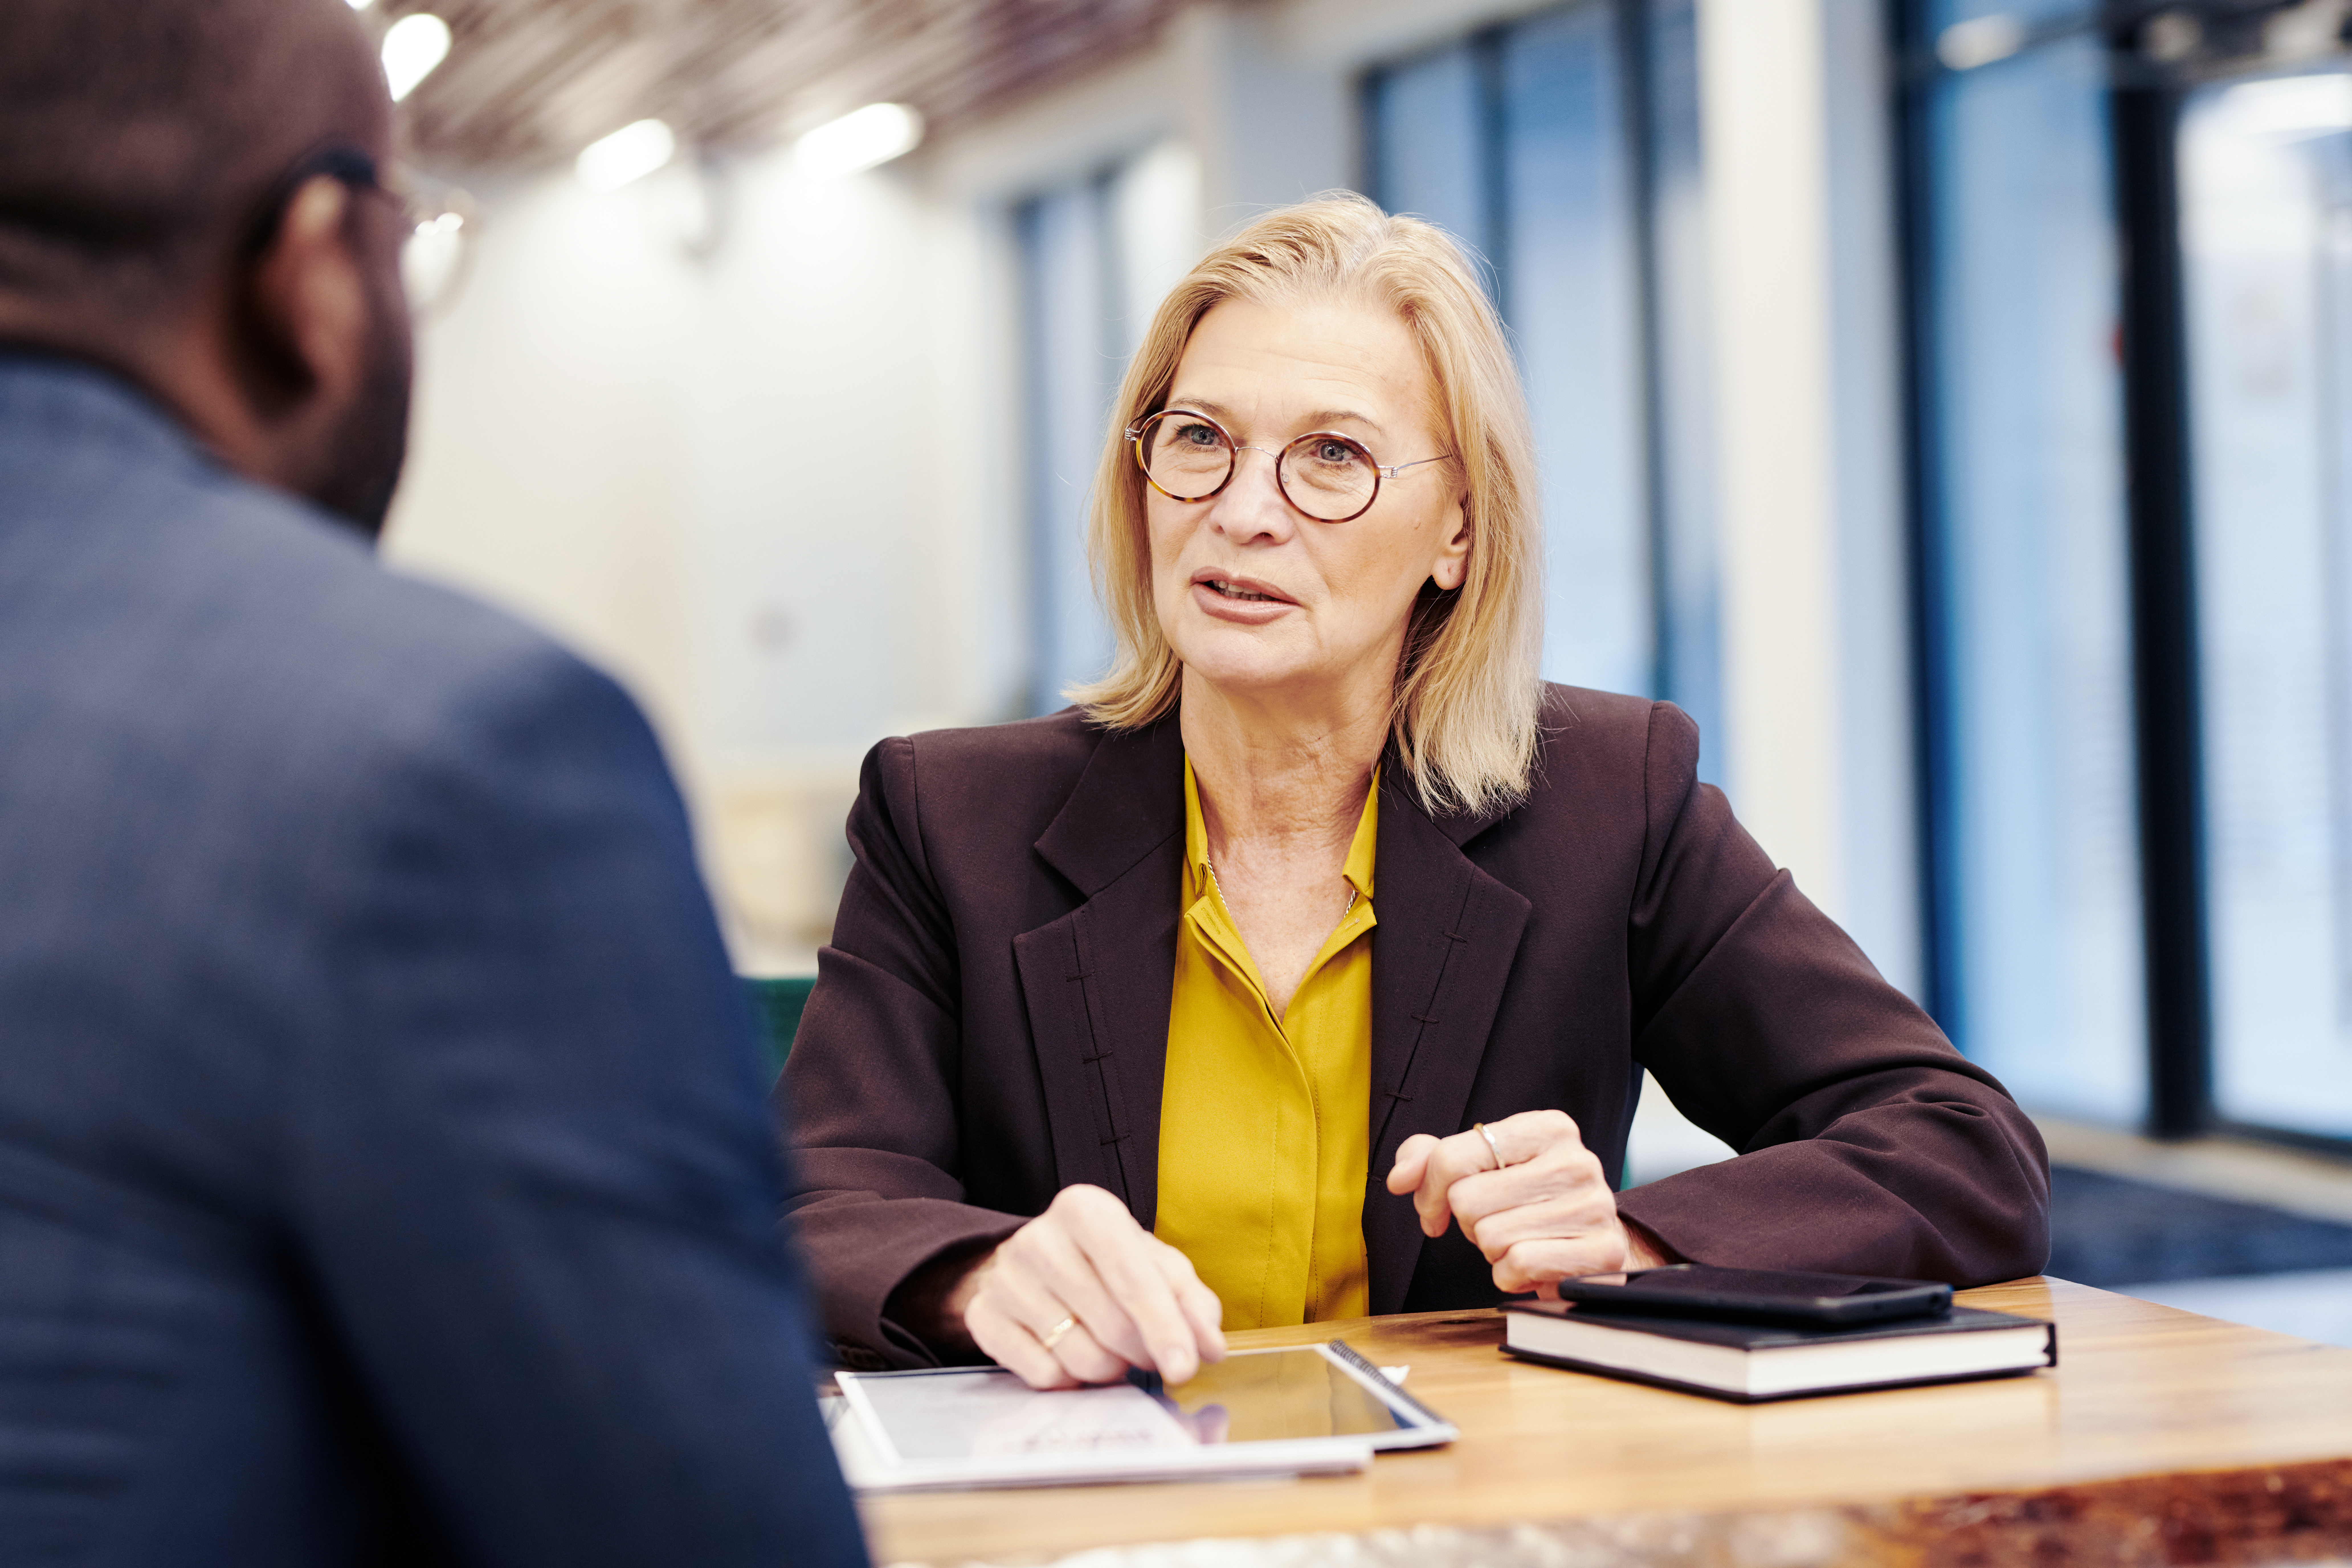 Mature female employee in discussion with a male employee